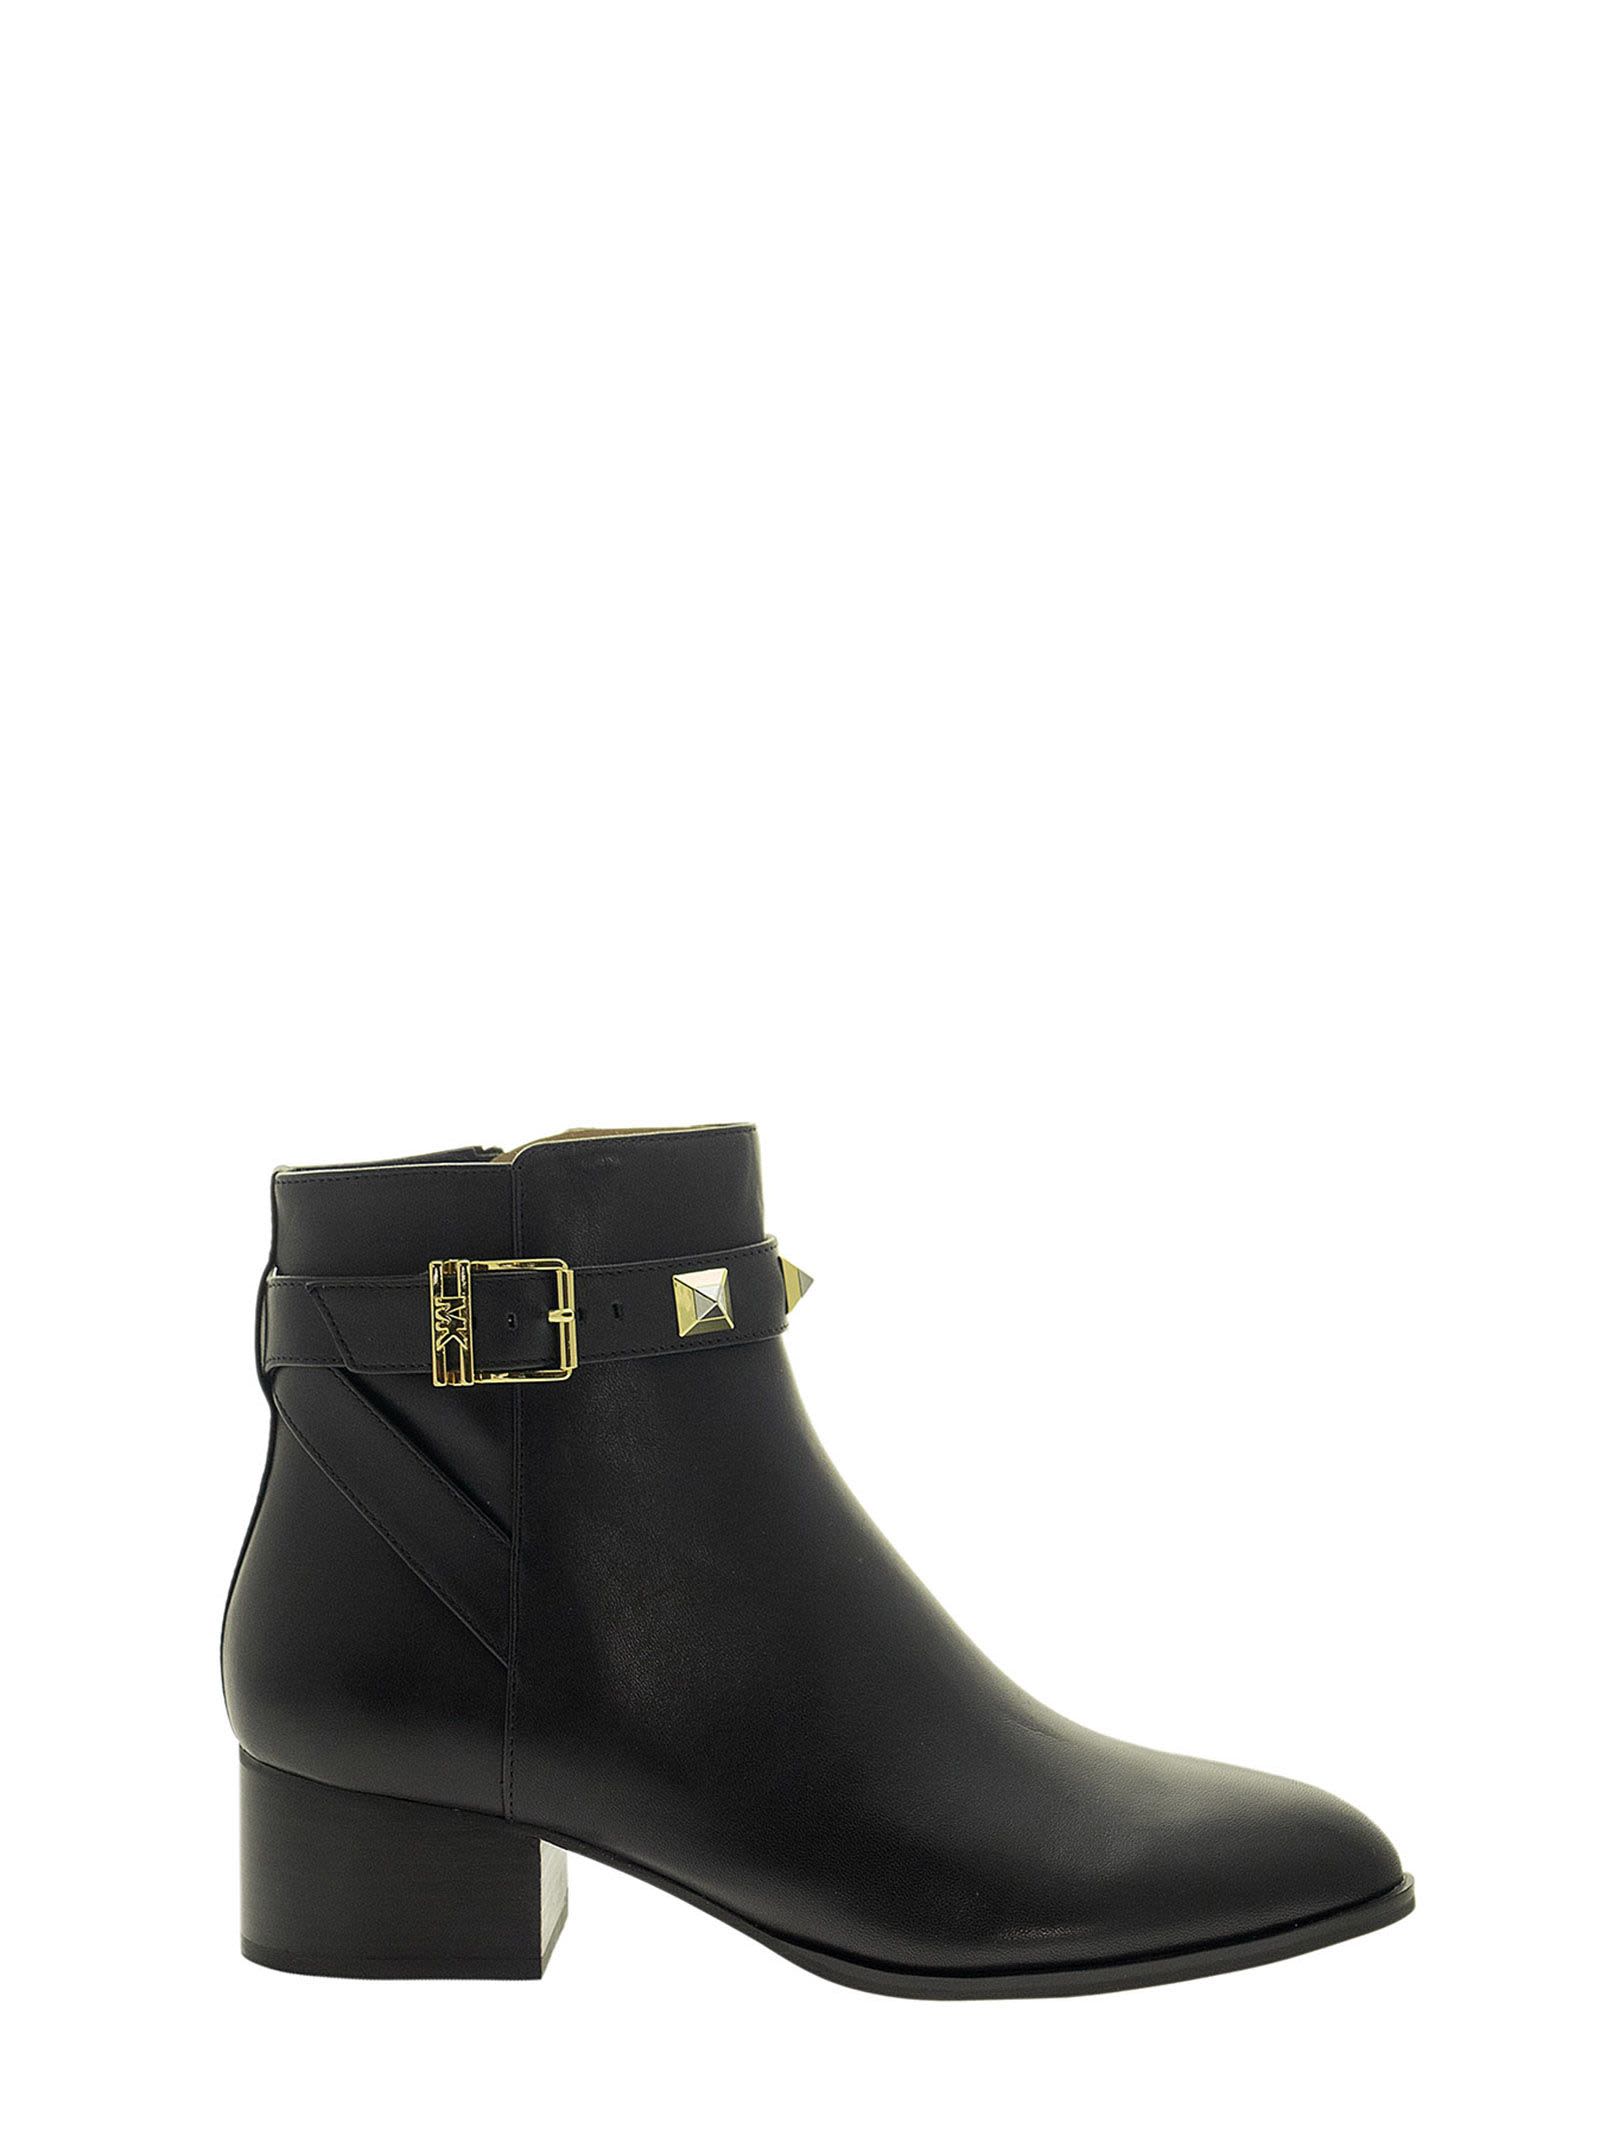 Michael Kors Britton Leather Ankle Boot